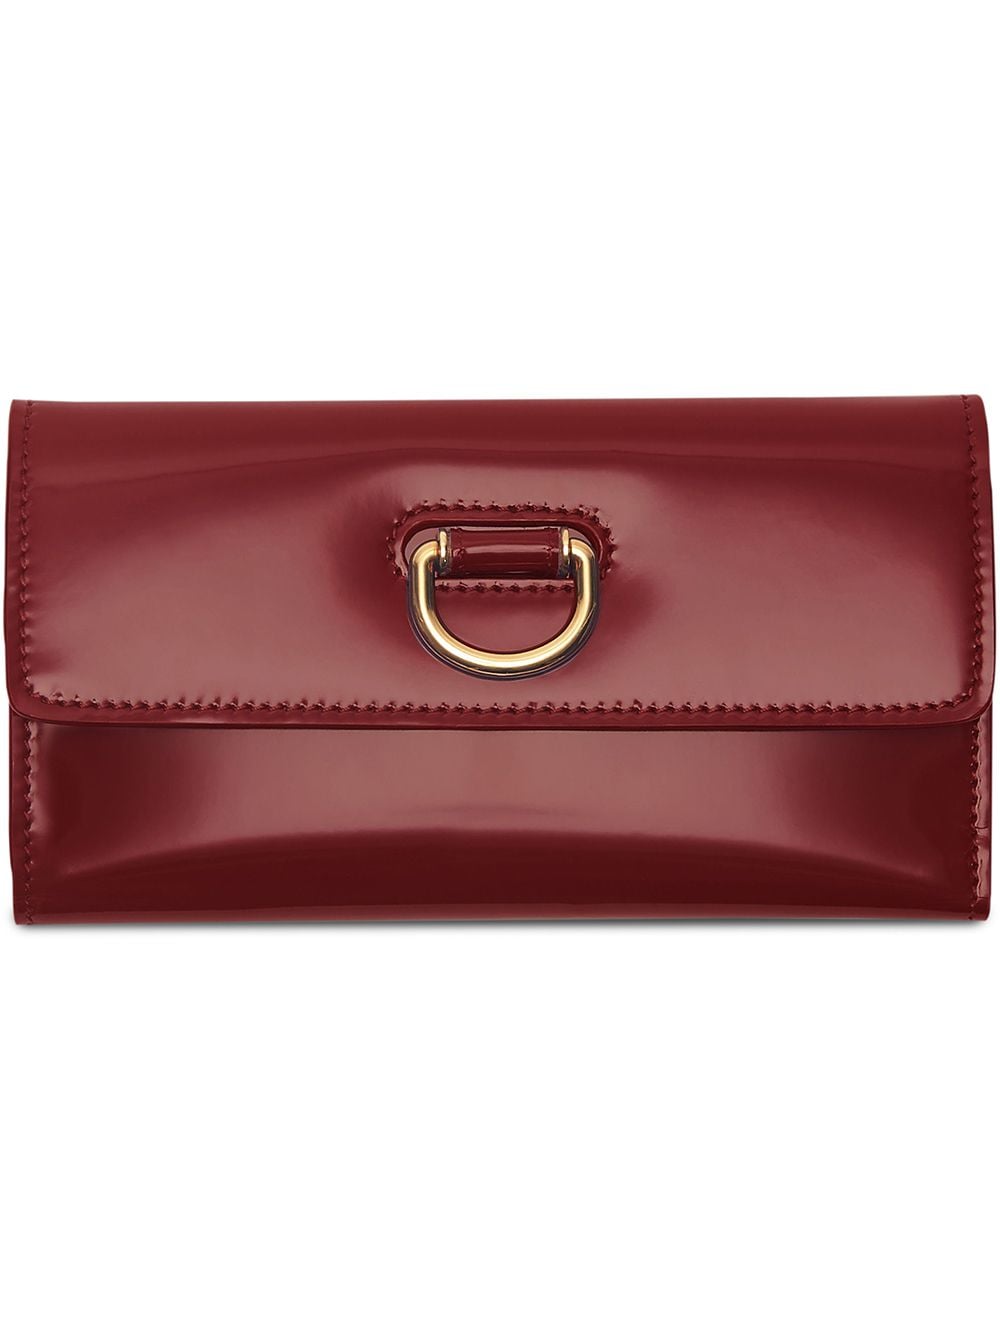 Burberry D-ring Patent Leather Continental Wallet - Farfetch